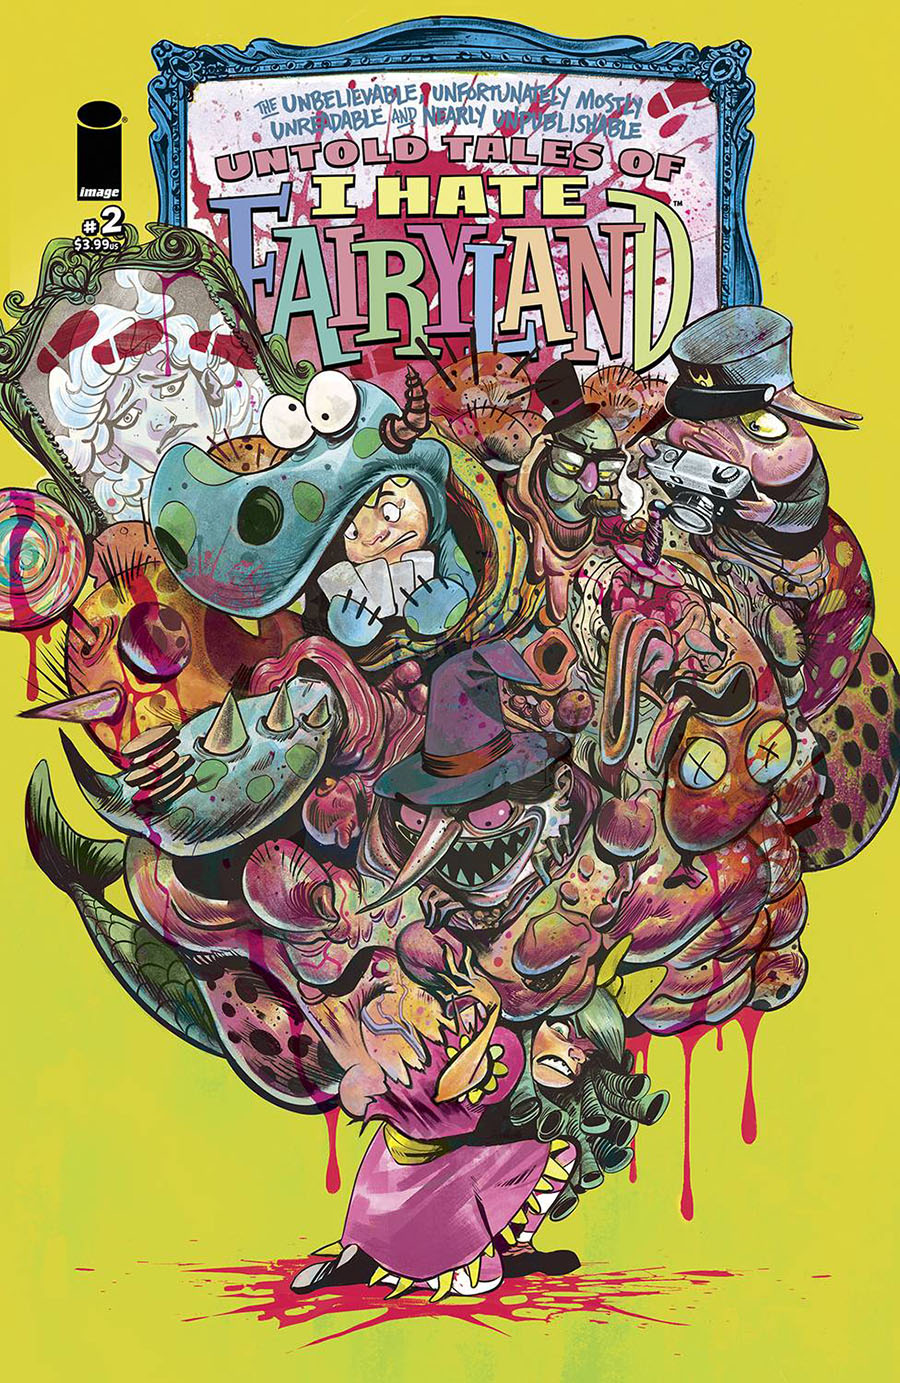 Unbelievable Unfortunately Mostly Unreadable And Nearly Unpublishable Untold Tales Of I Hate Fairyland #2